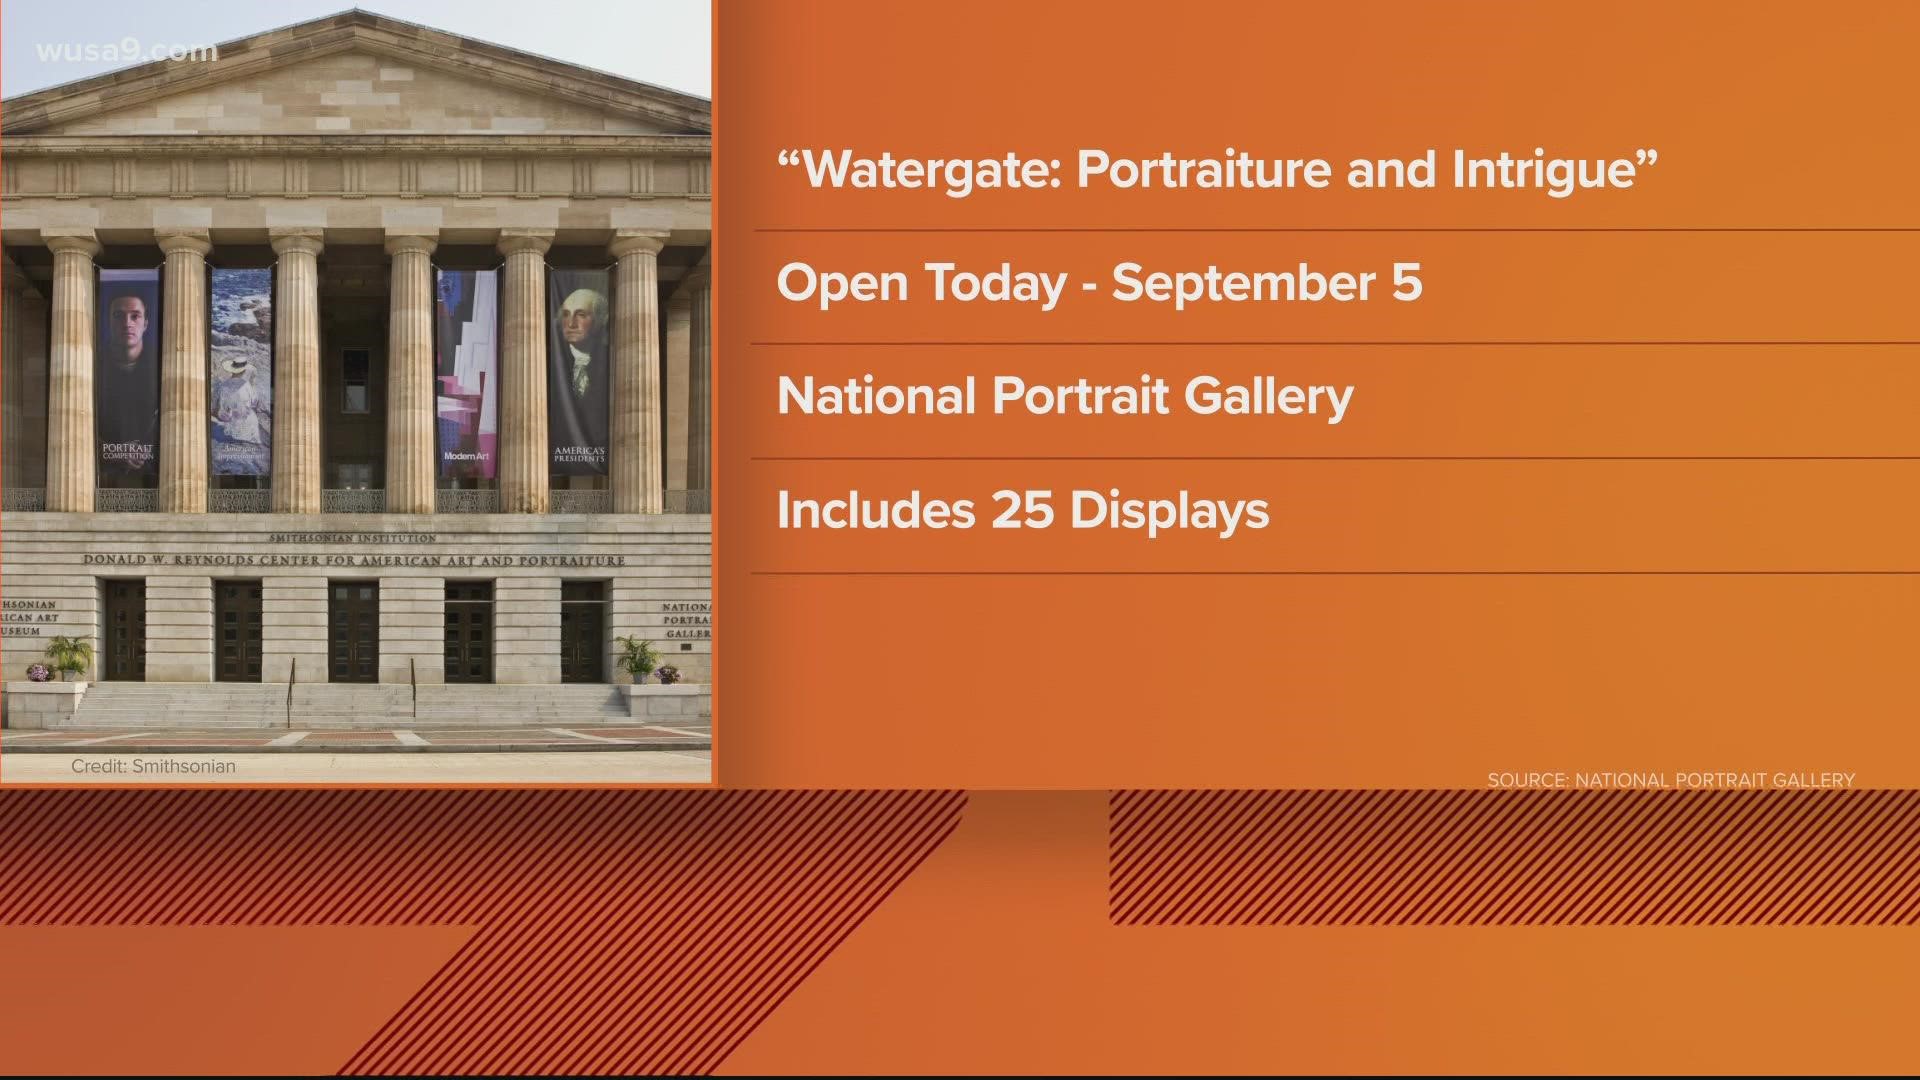 The exhibit is called "Watergate: Portraiture and Intrigue" and will be housed in the museum through the beginning of September.